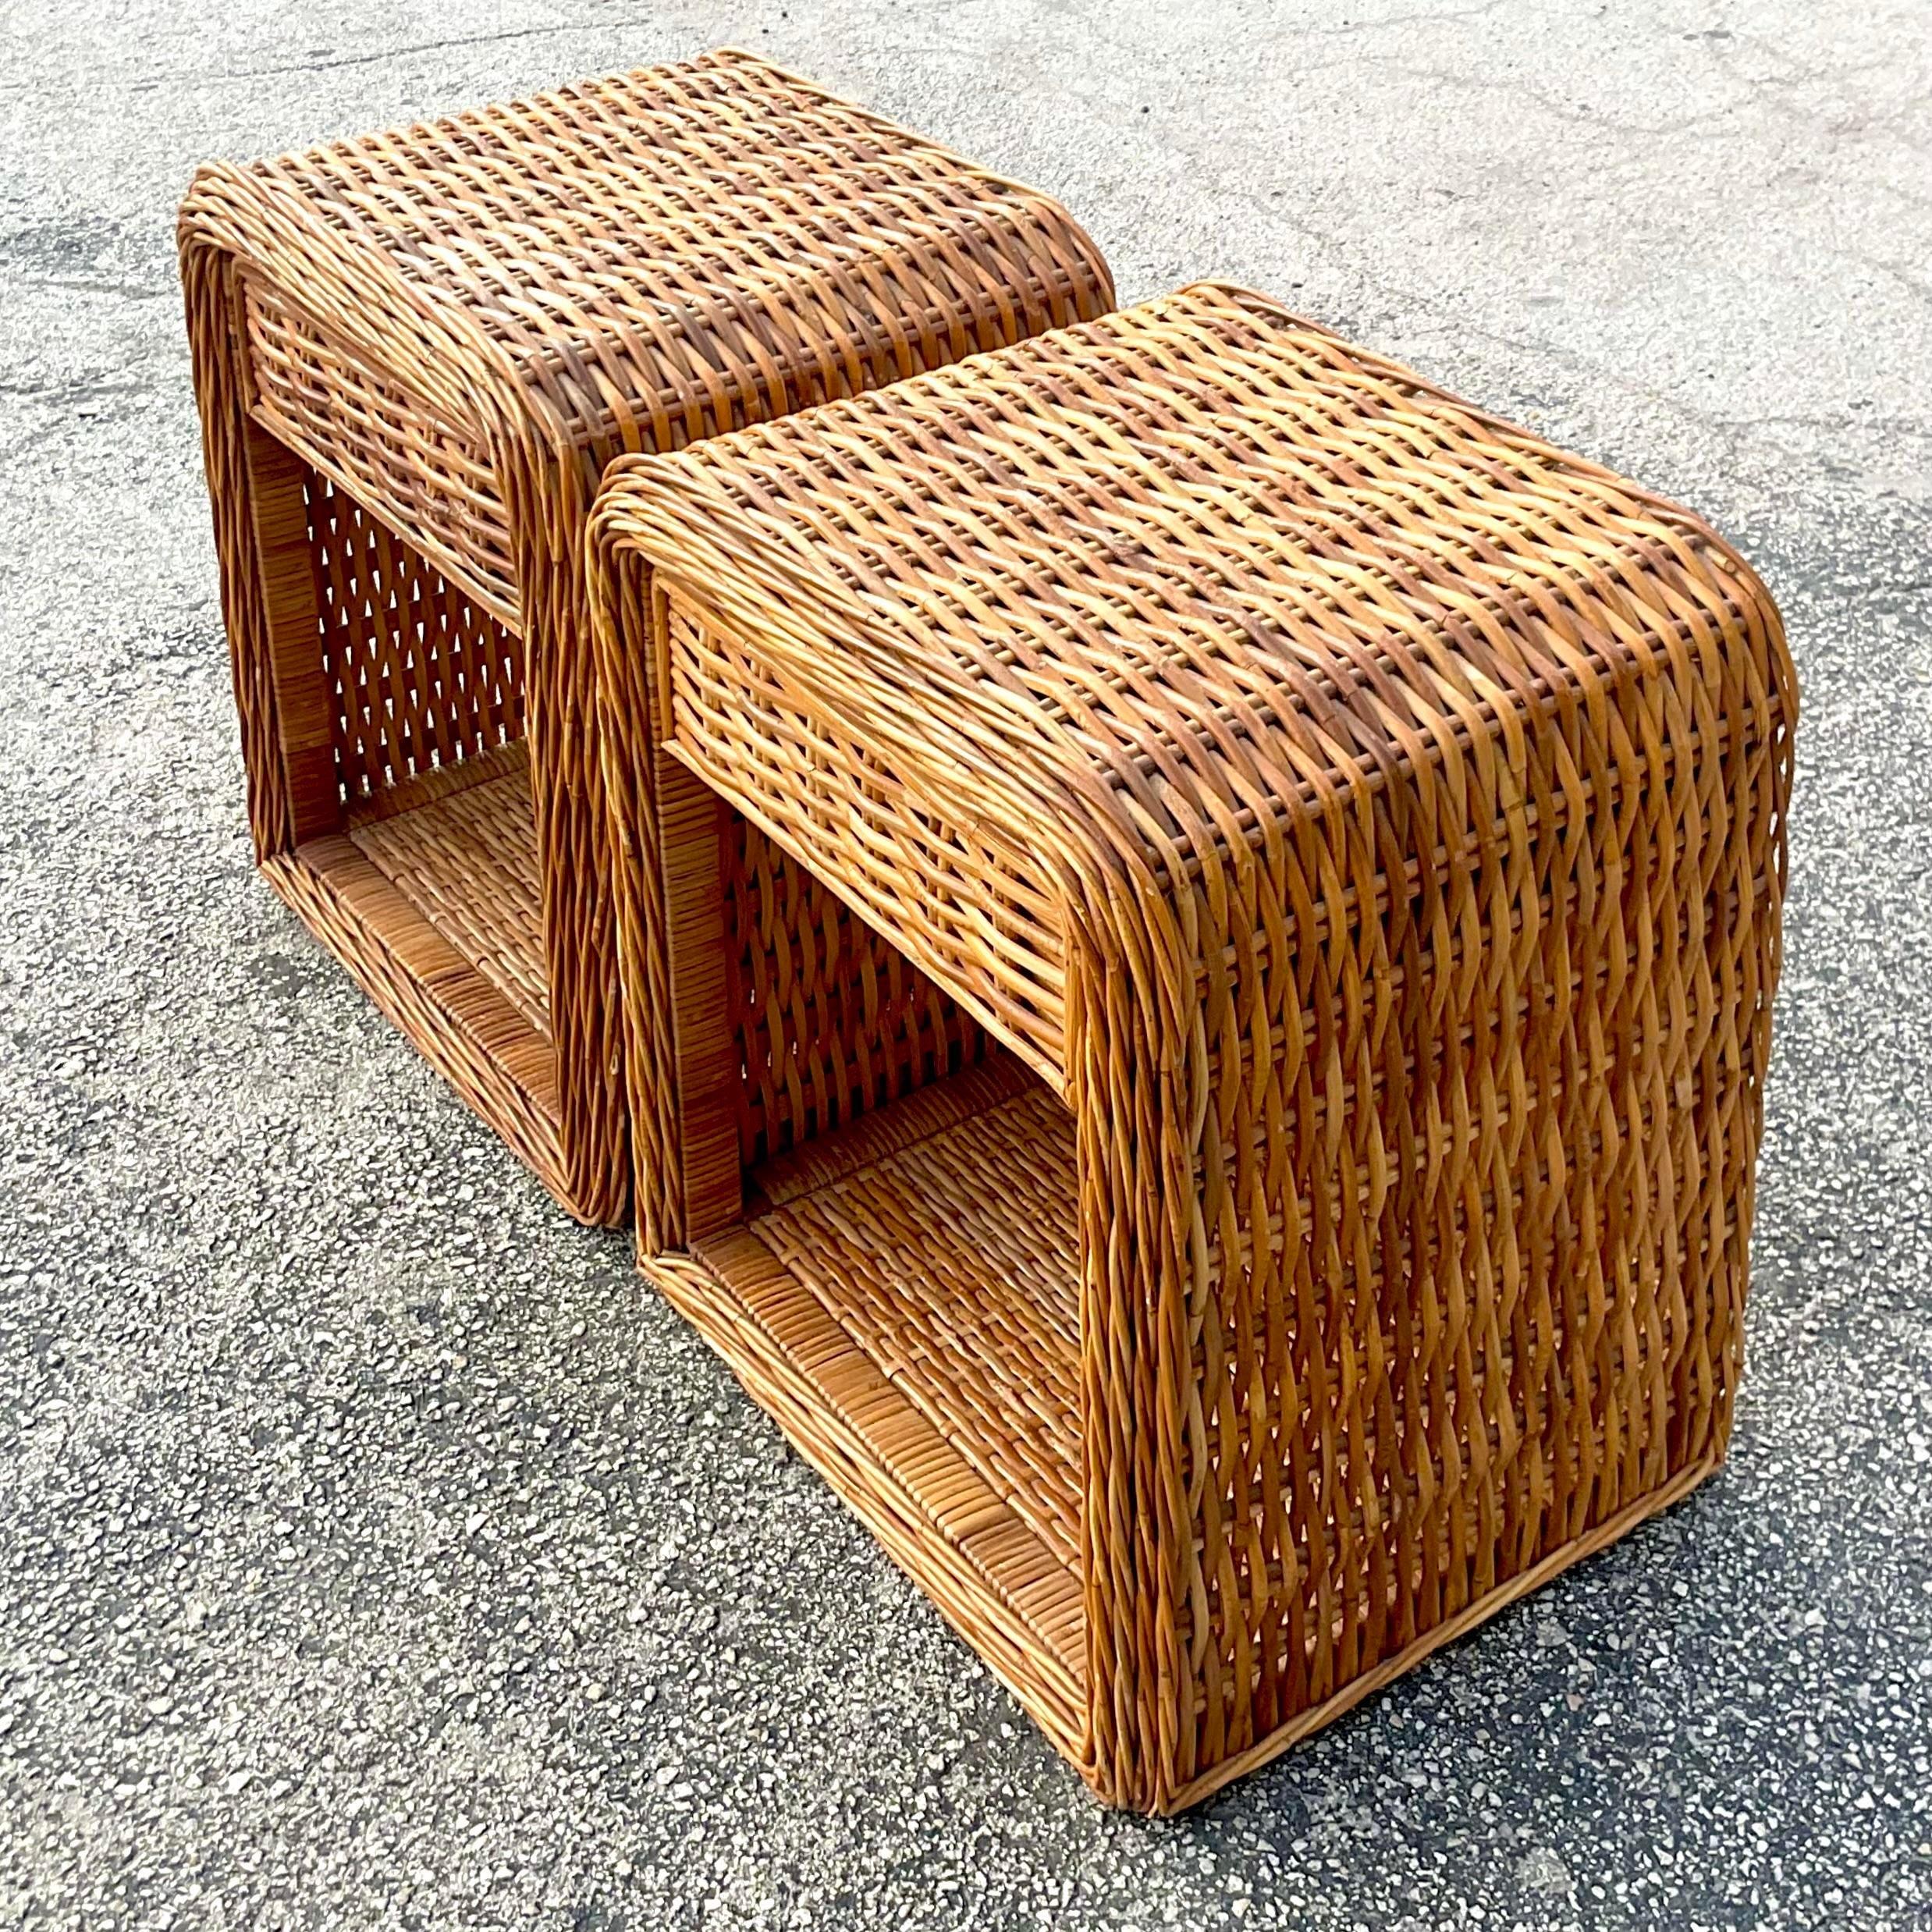 A fantastic pair of vintage Coastal nightstands. A beautiful woven rattan in a chic waterfall shape. Acquired from a Palm Beach estate.